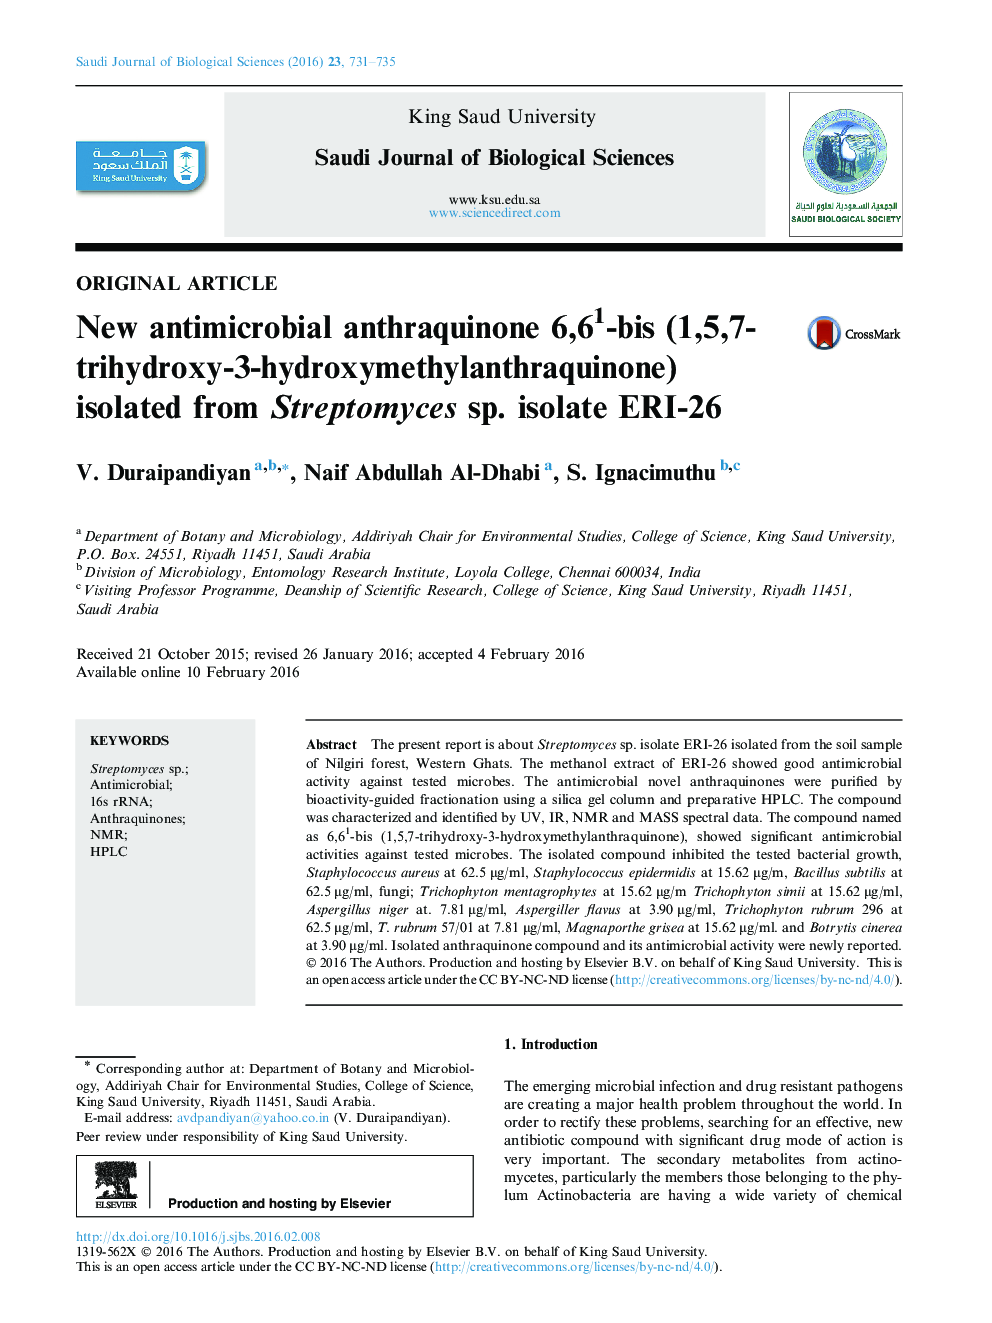 Original articleNew antimicrobial anthraquinone 6,61-bis (1,5,7-trihydroxy-3-hydroxymethylanthraquinone) isolated from Streptomyces sp. isolate ERI-26